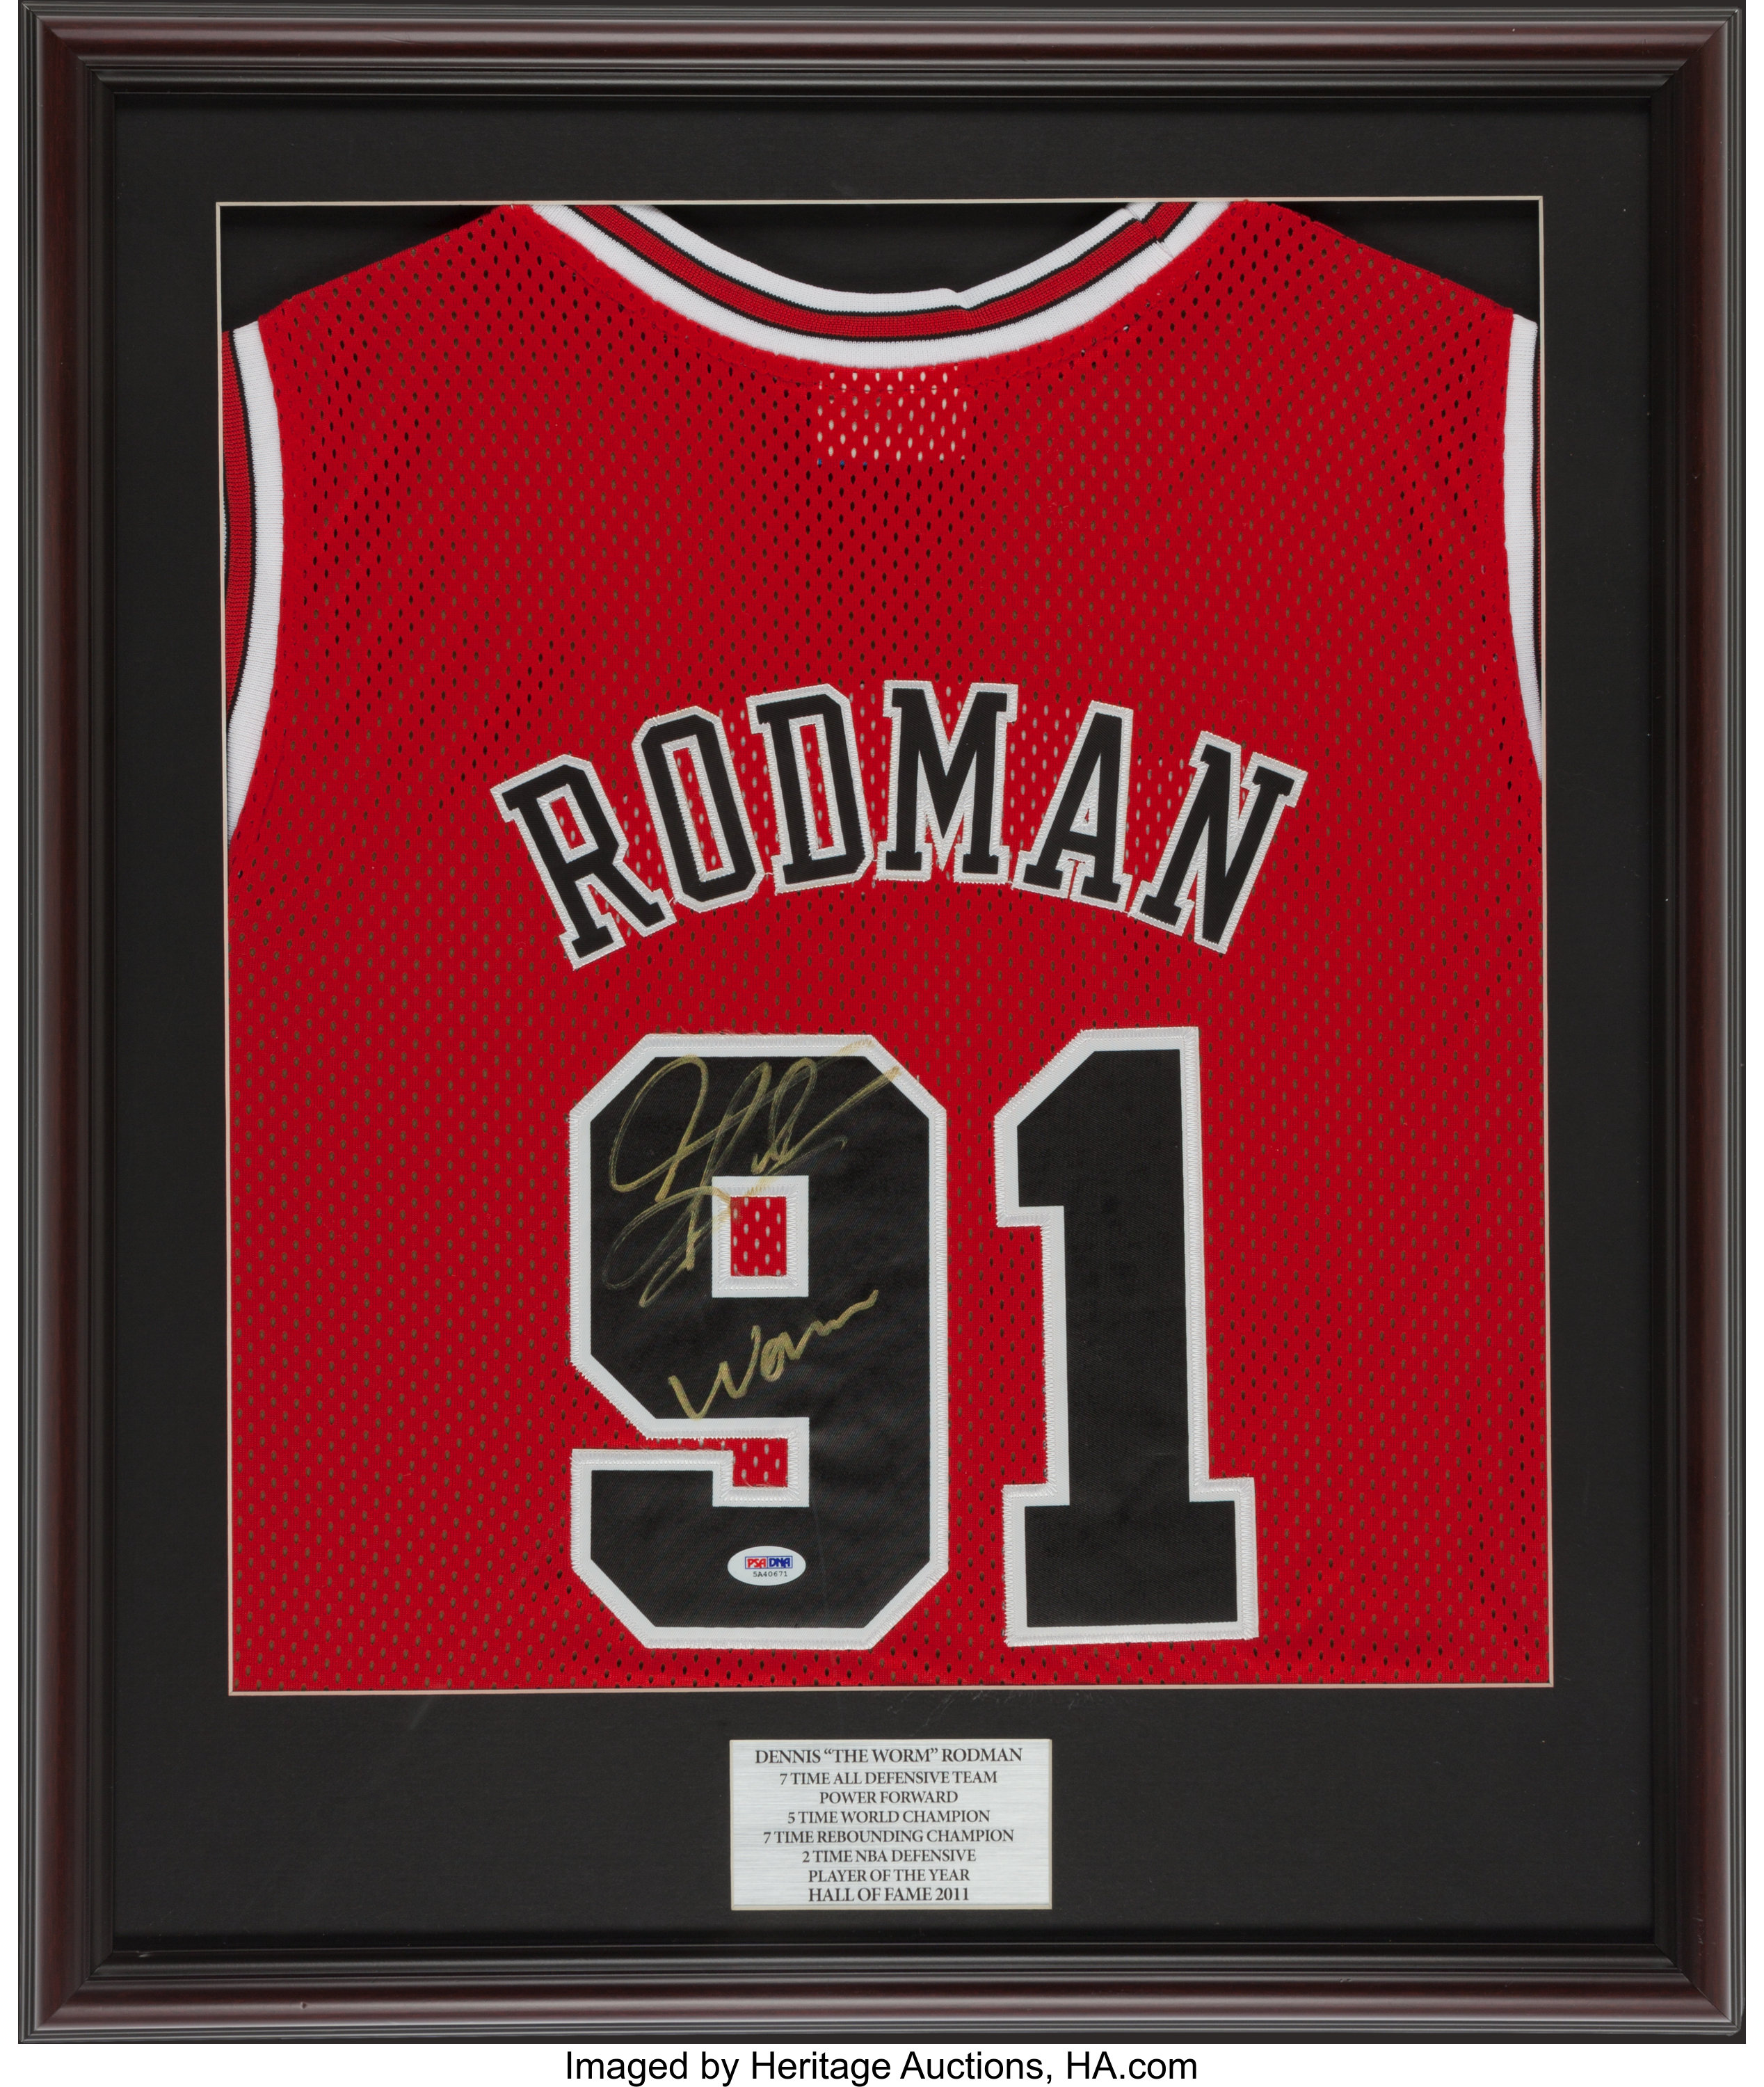 Dennis Rodman Autographed & Inscribed “THE WORM” 20x24